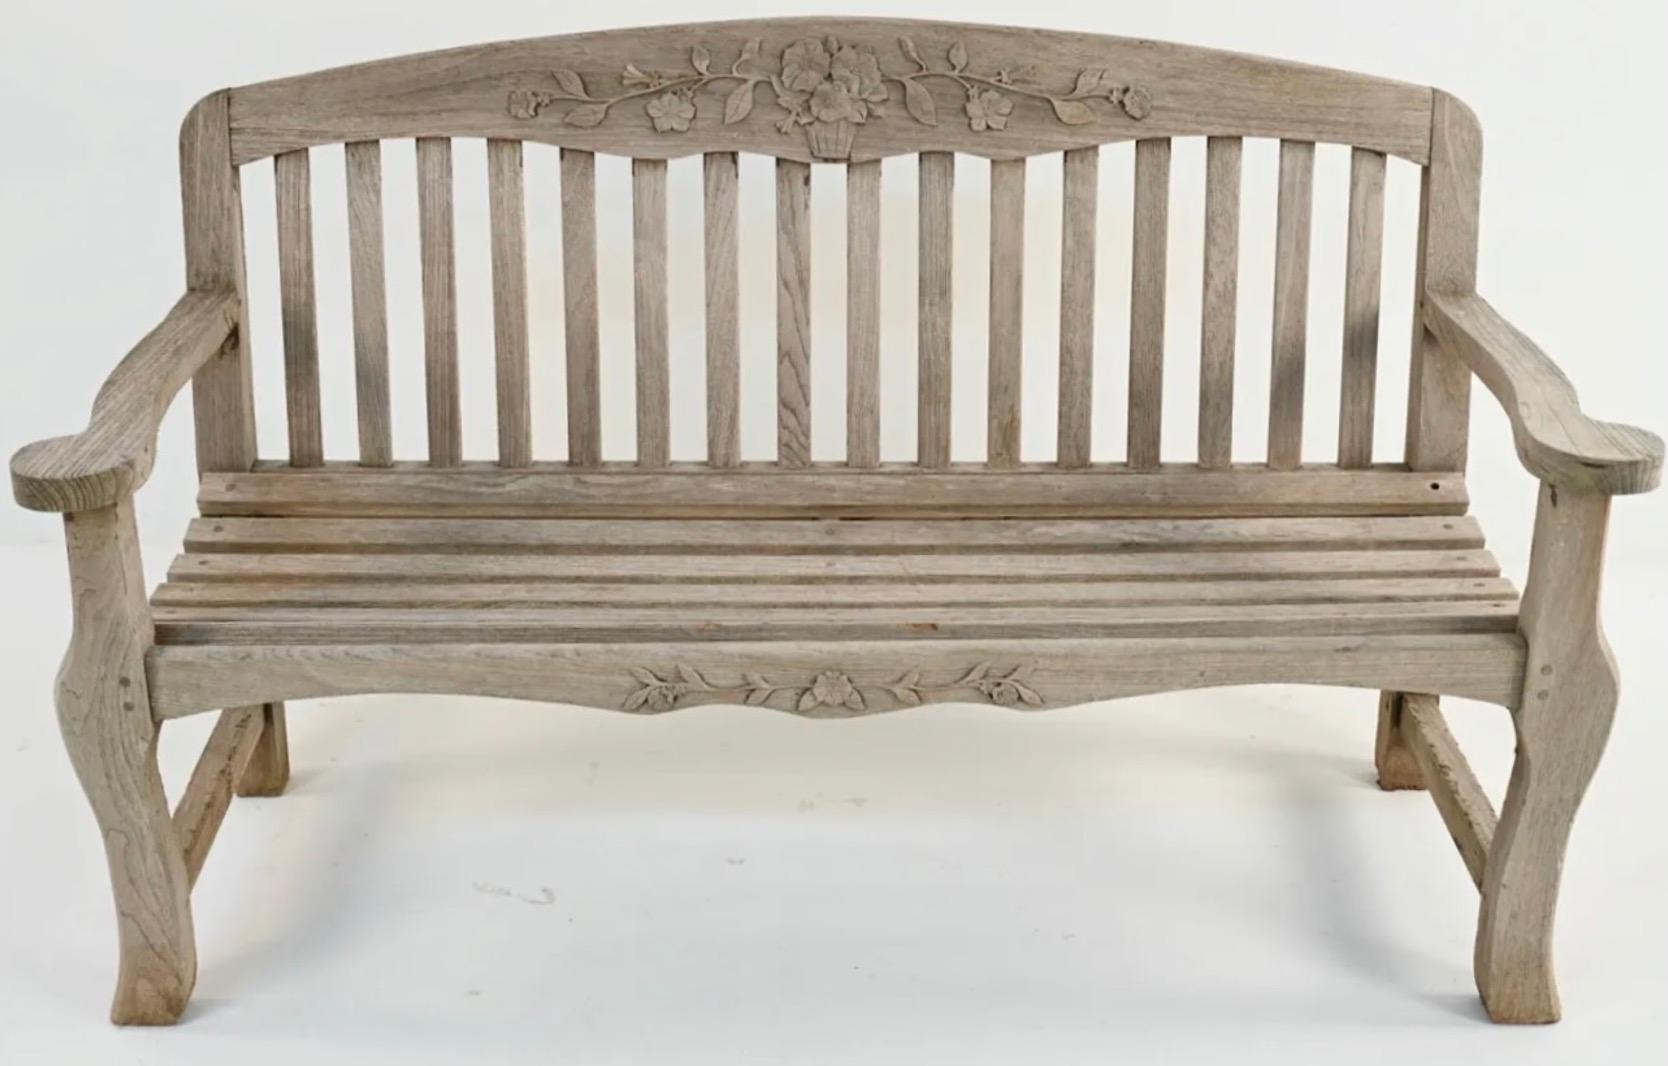 Add style and comfort to your outdoor seating with this beautifully carved settee or sofa bench with cabriole legs. 
Labeled Kinsley Bates on right side of seat.